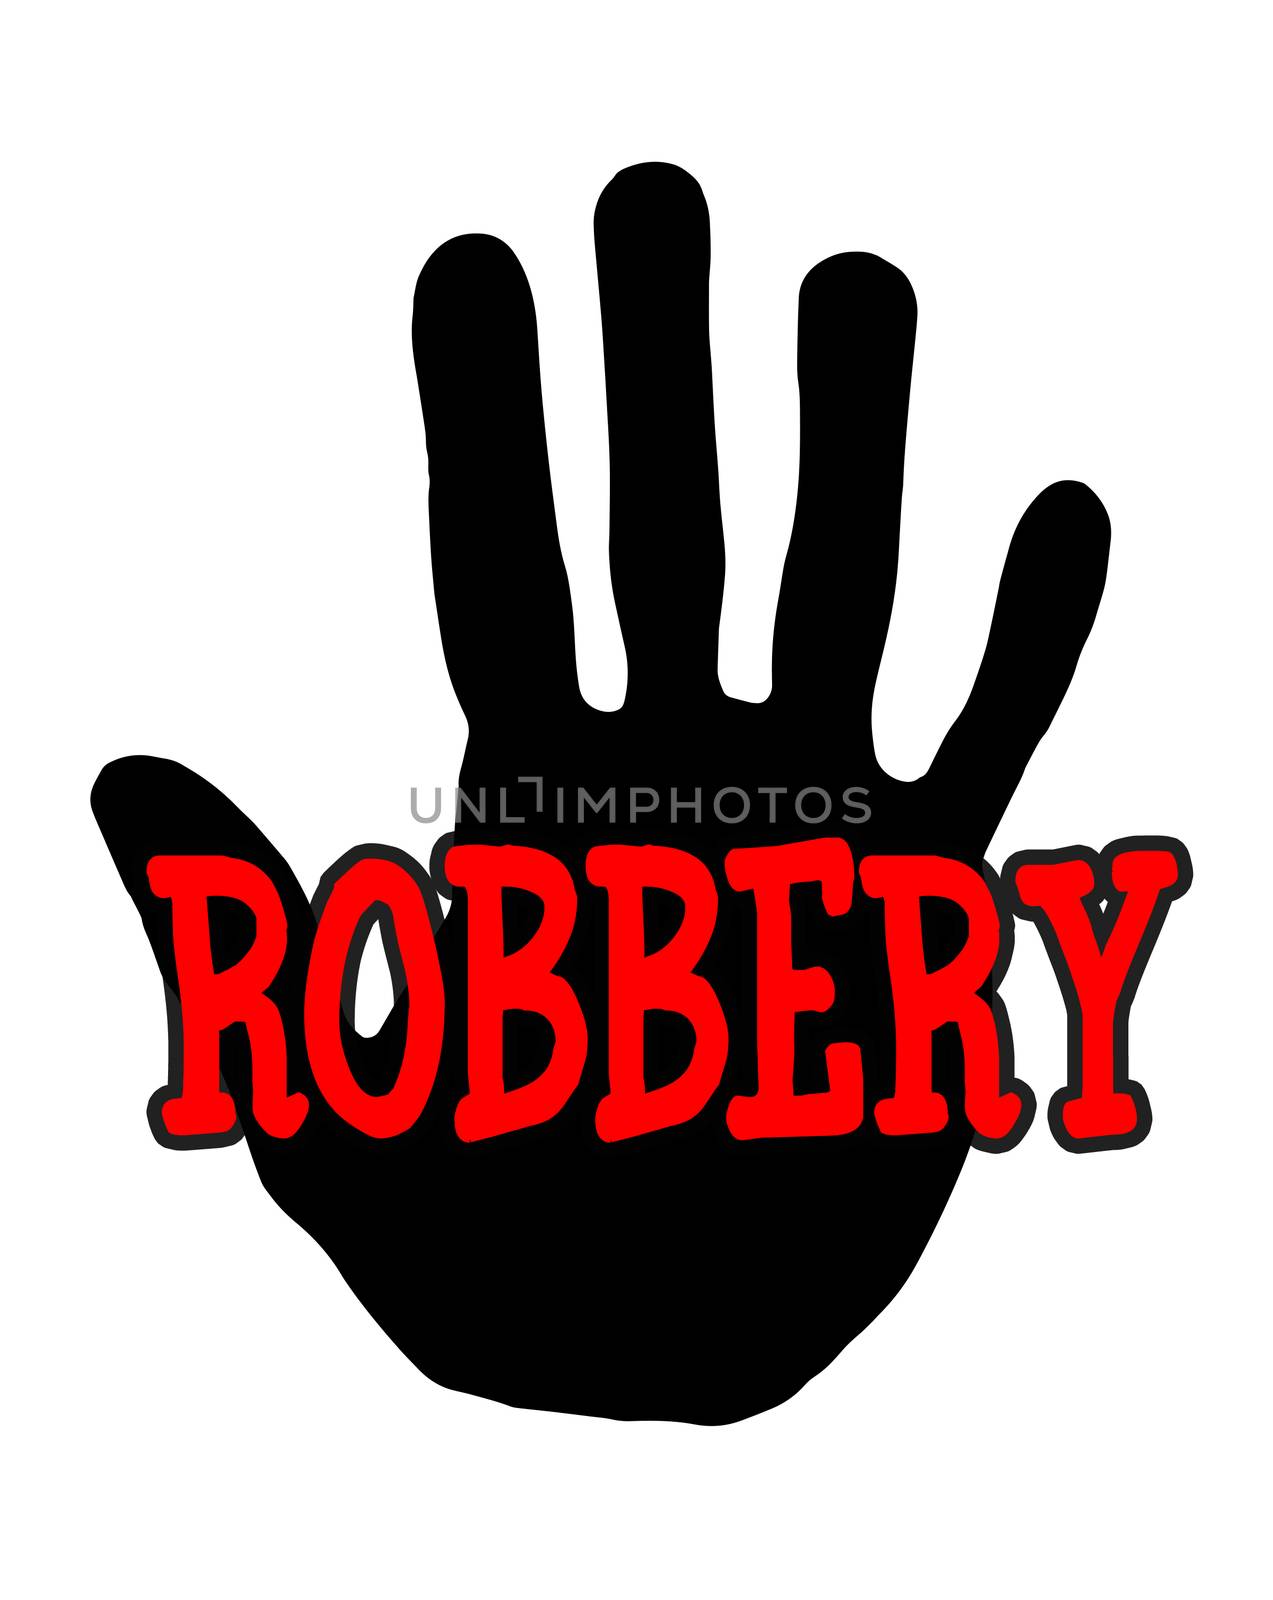 Man handprint isolated on white background showing stop robbery